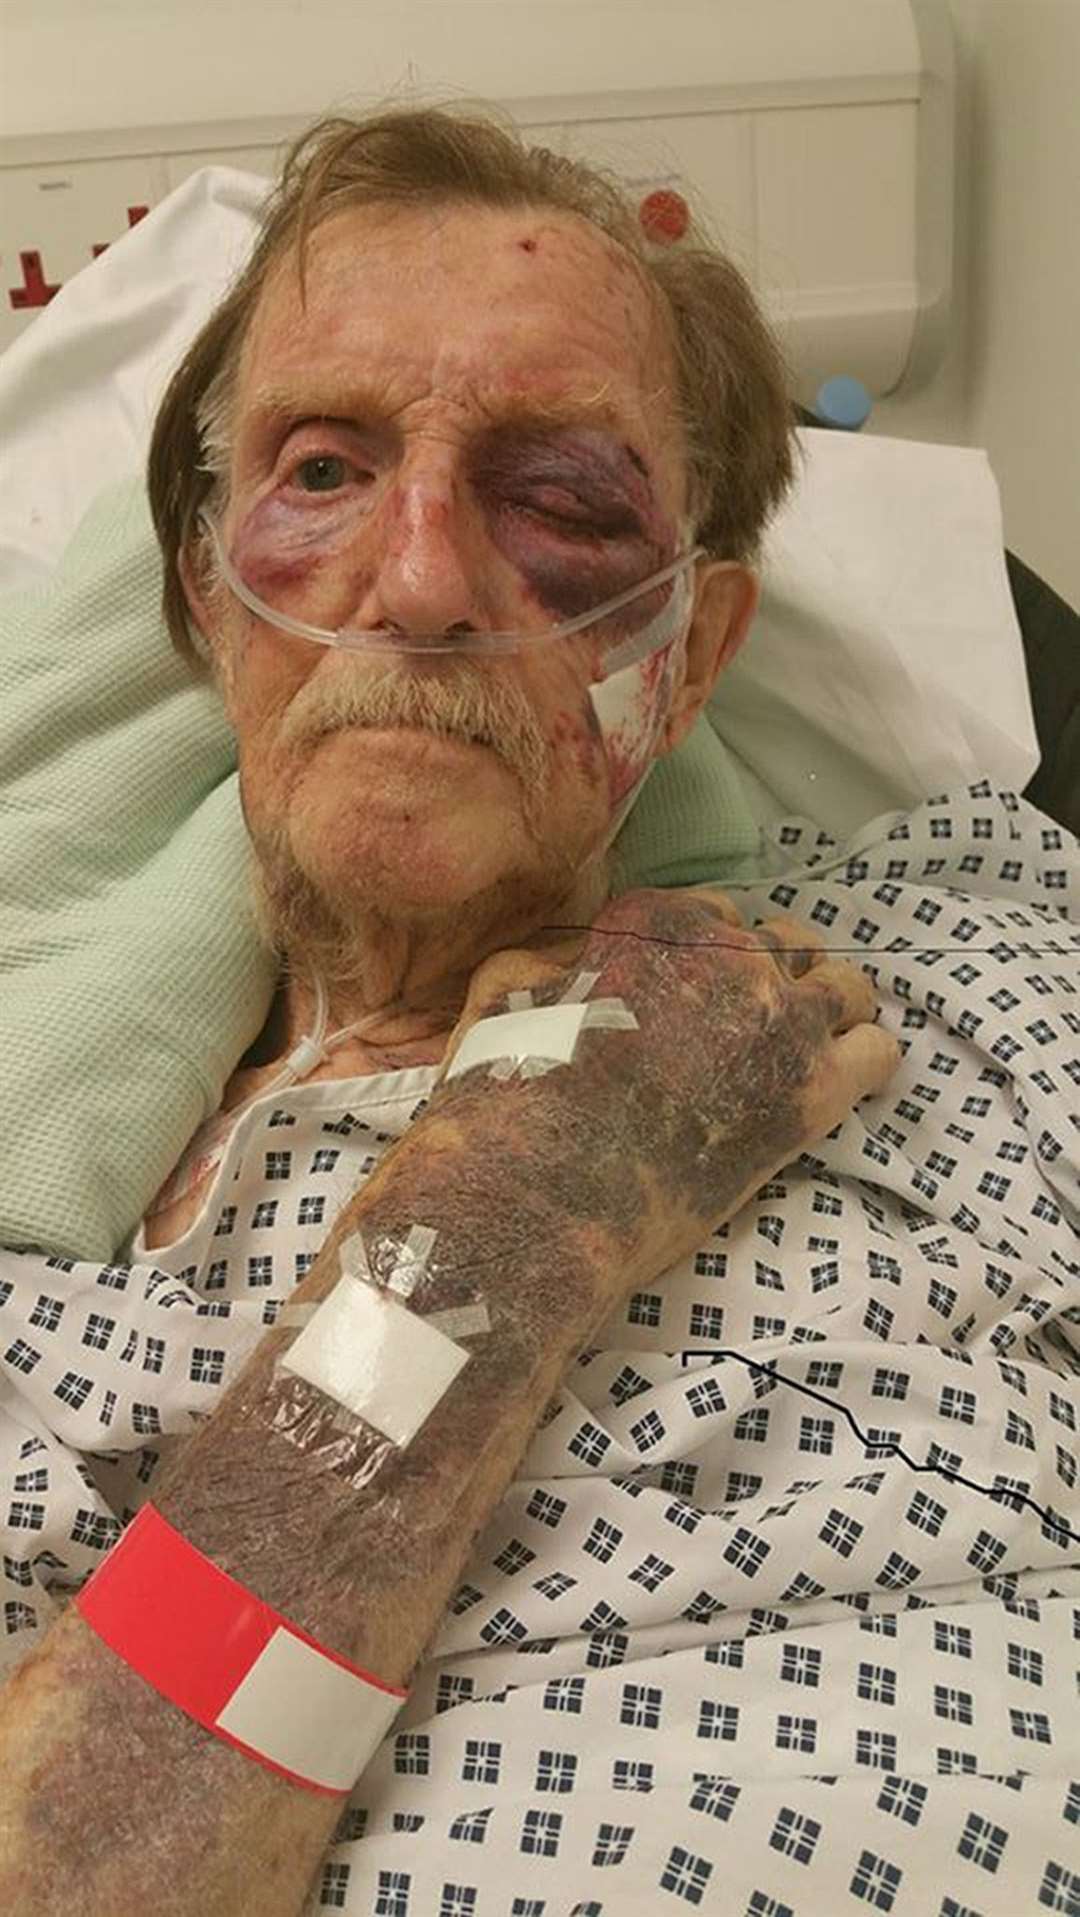 Pictures of Arthur Gumbley’s injuries were released in 2017 as part of appeals to catch his attackers (Staffordshire Police/PA)